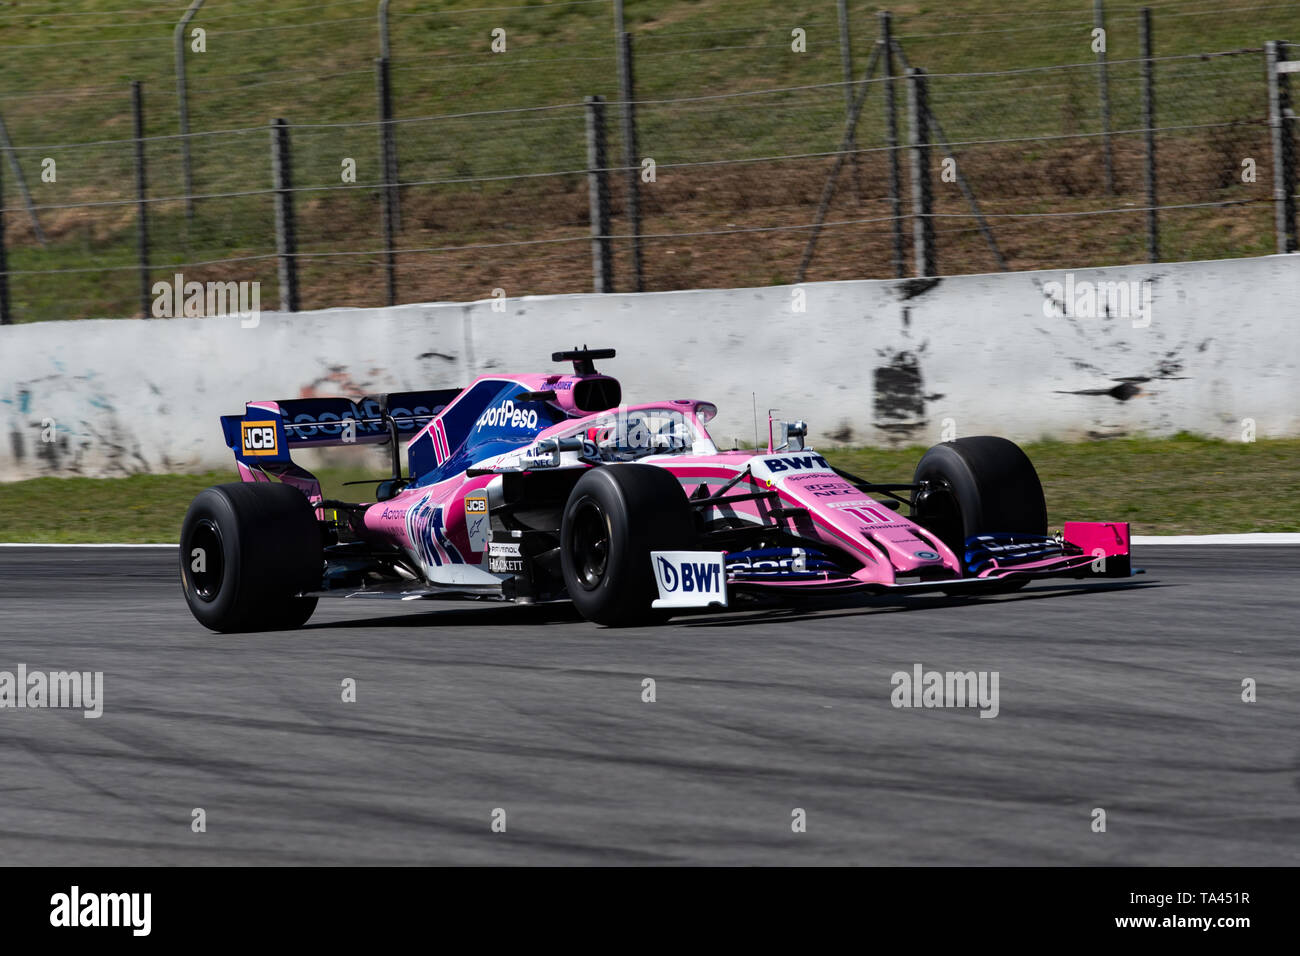 Barcelona, Spain, May 14th, 2019 - Sergio Perez from Mexico (11) with Racing Point F1 on track during F1 Mid-Season Test. Stock Photo